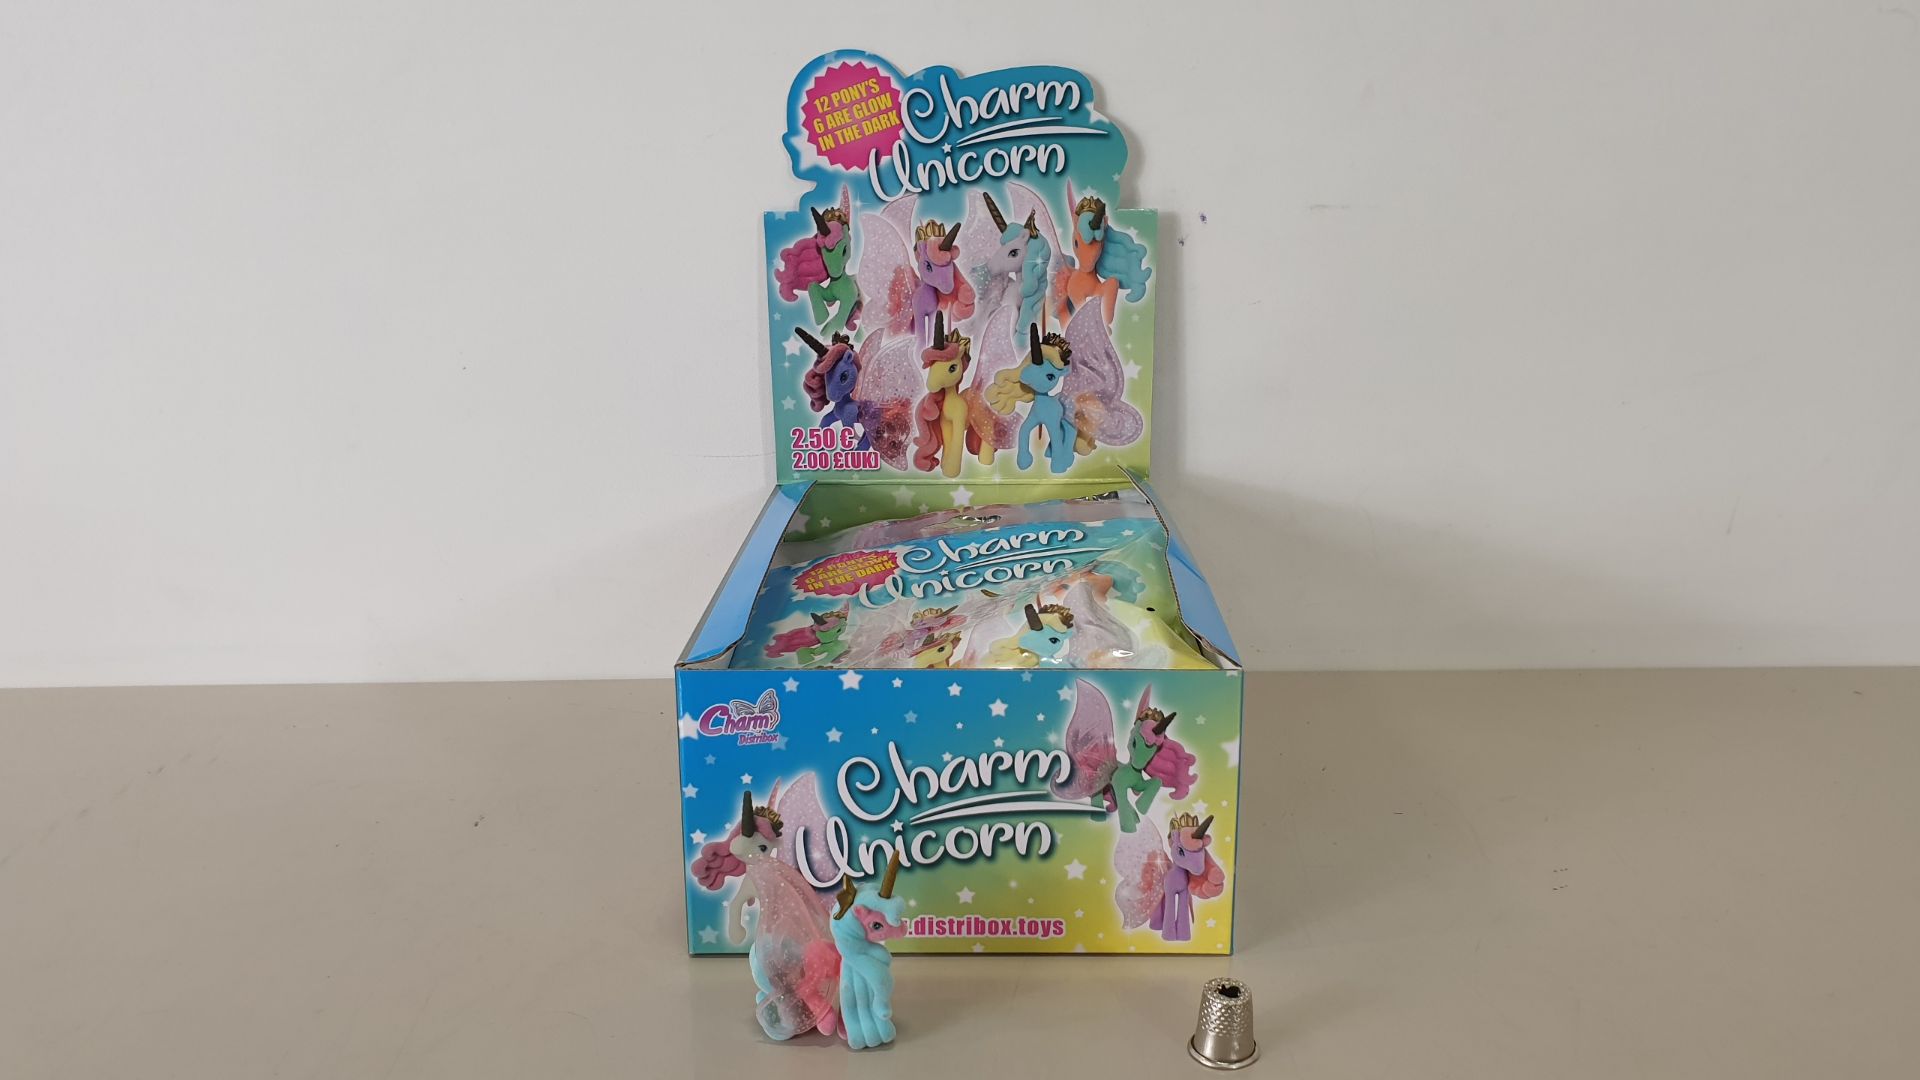 360 X BRAND NEW INDIVIDUALLY PACKAGED CHIQUI CHARM UNICORNS - 30 X 12 POINT OF SALE DISPLAY